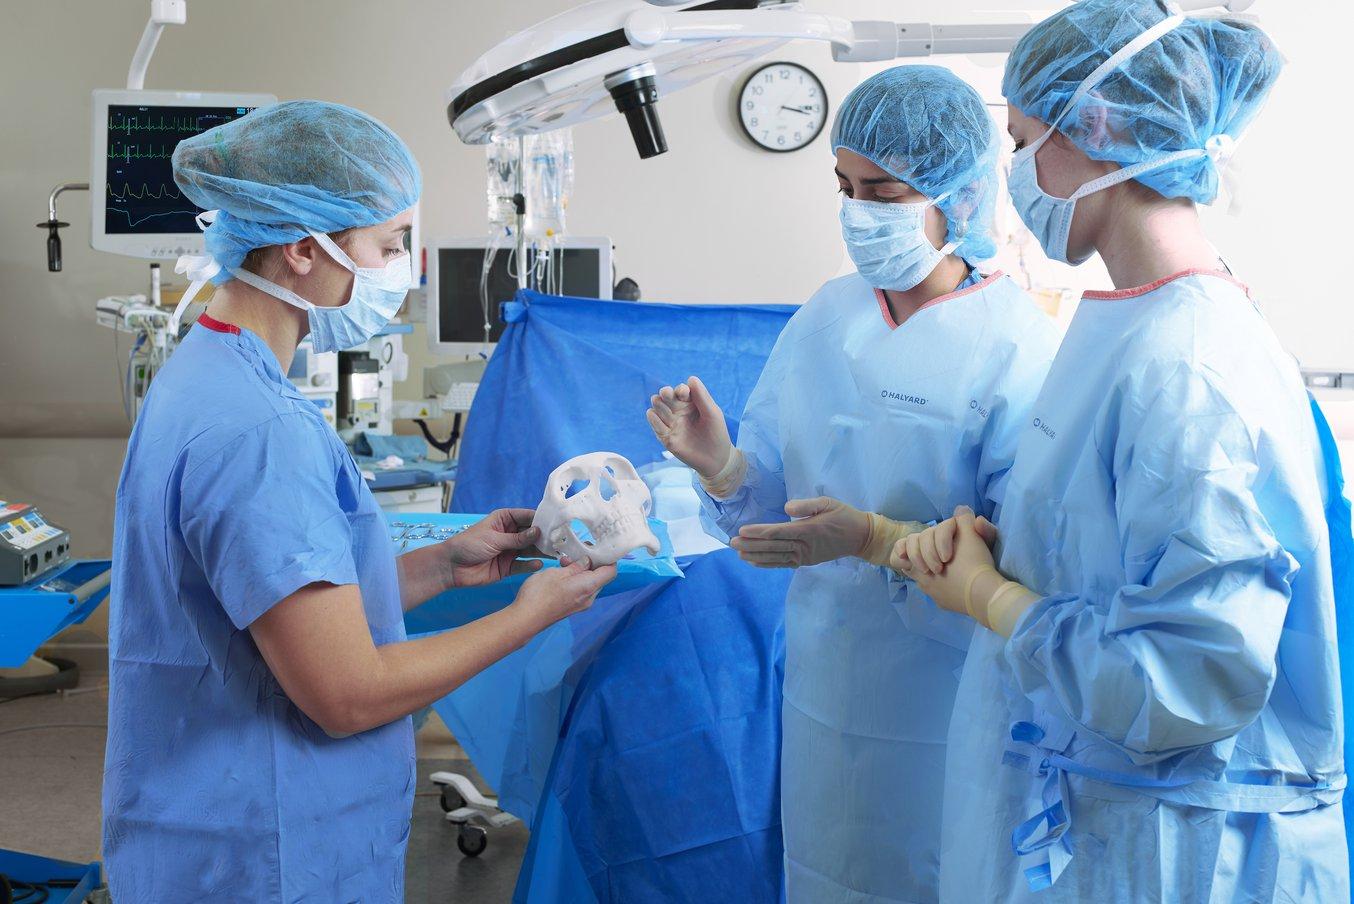 Three people in operating room with an anatomical model